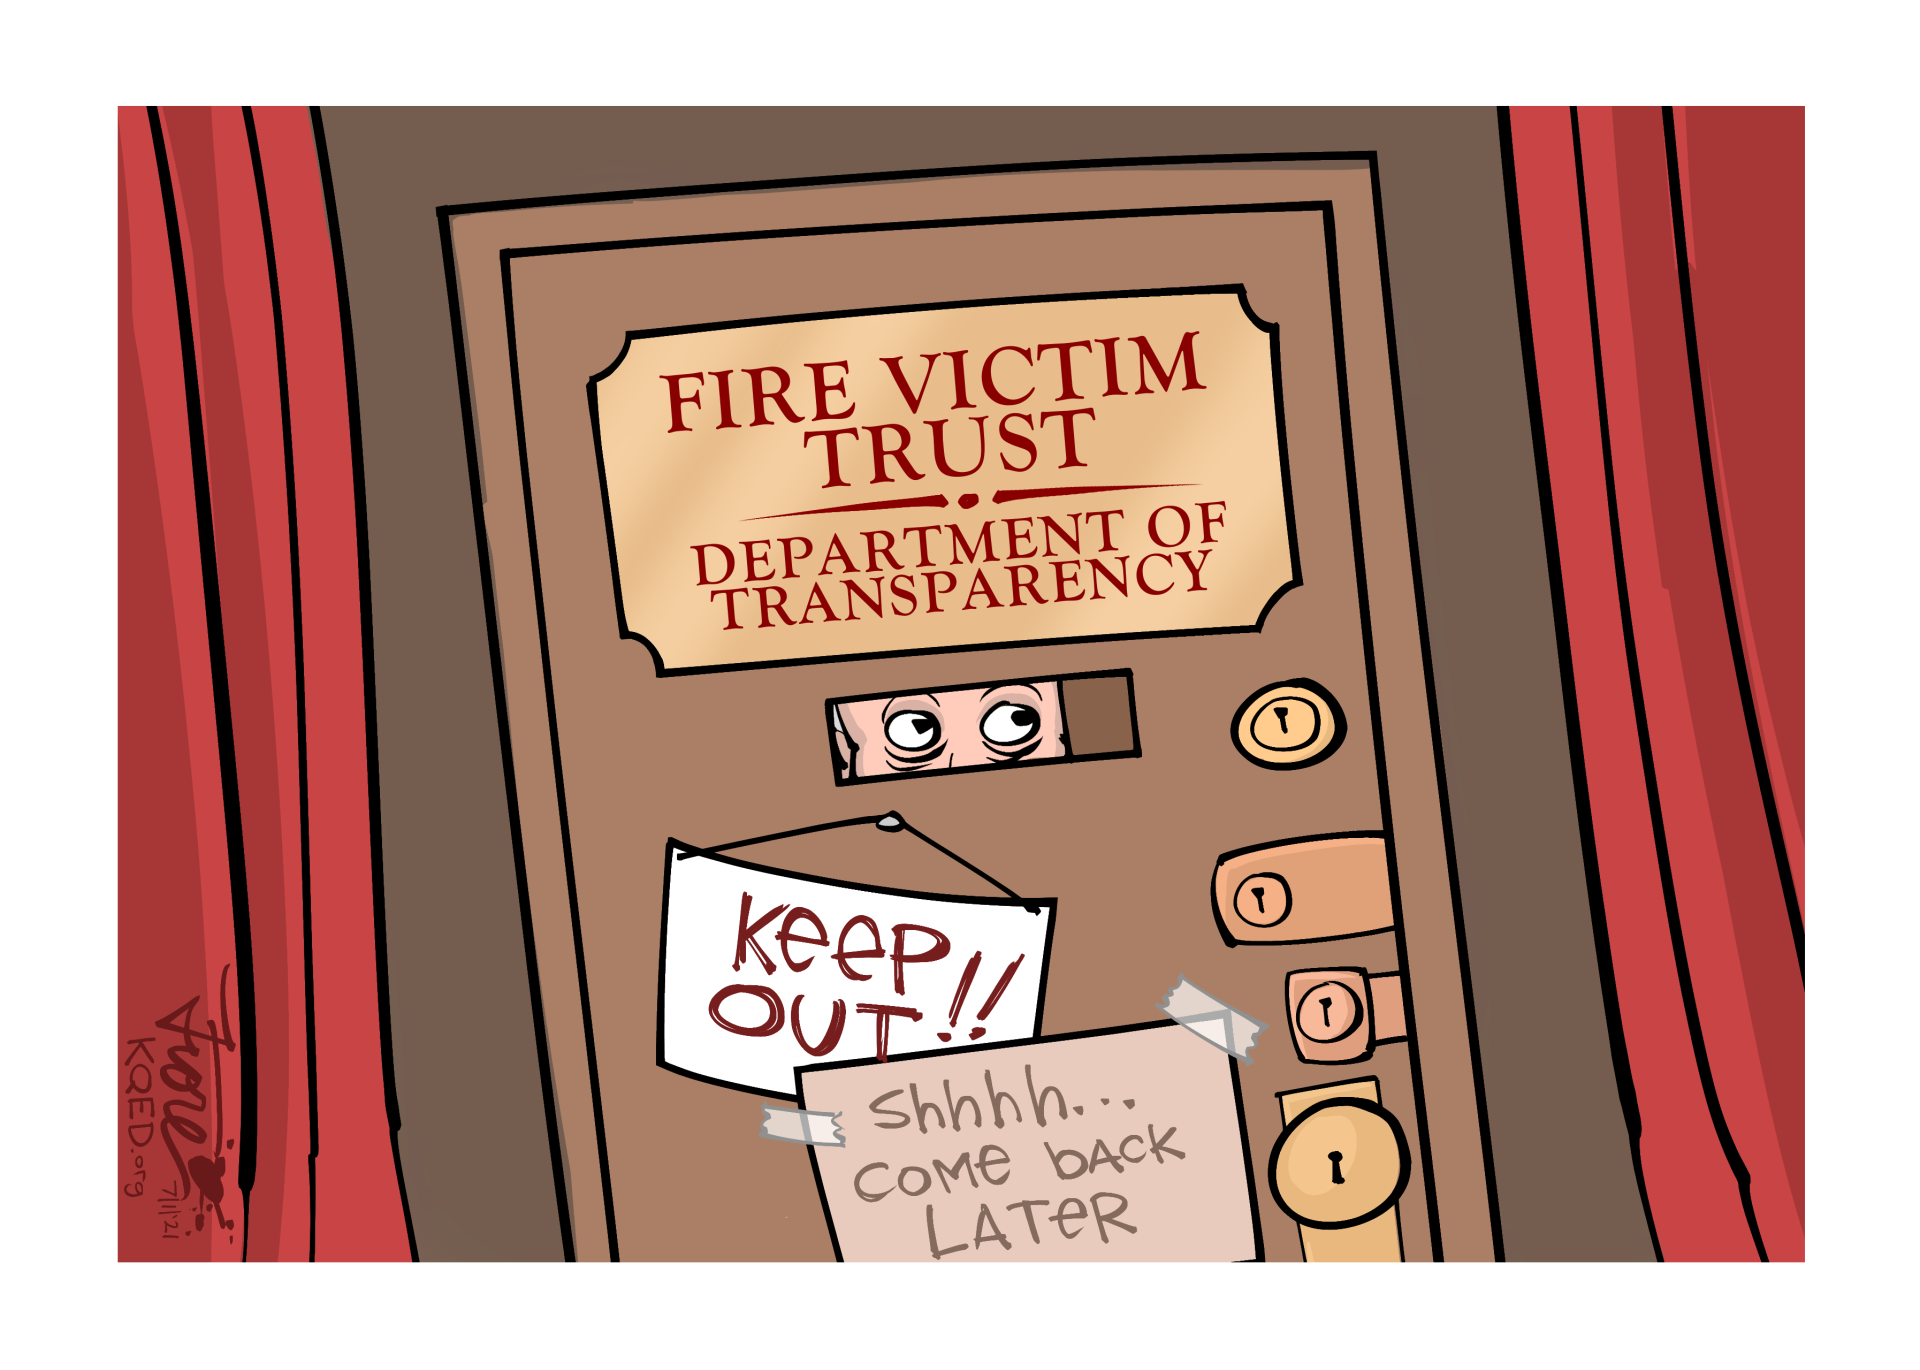 A Mark Fiore cartoon showing a door with many deadbolts and locks and a speakeasy style window. The first sign on the door says, "Fire Victim Trust, Department of Transparency." There are two additional, handmade-looking signs that say "keep out" and "shhh, come back later."